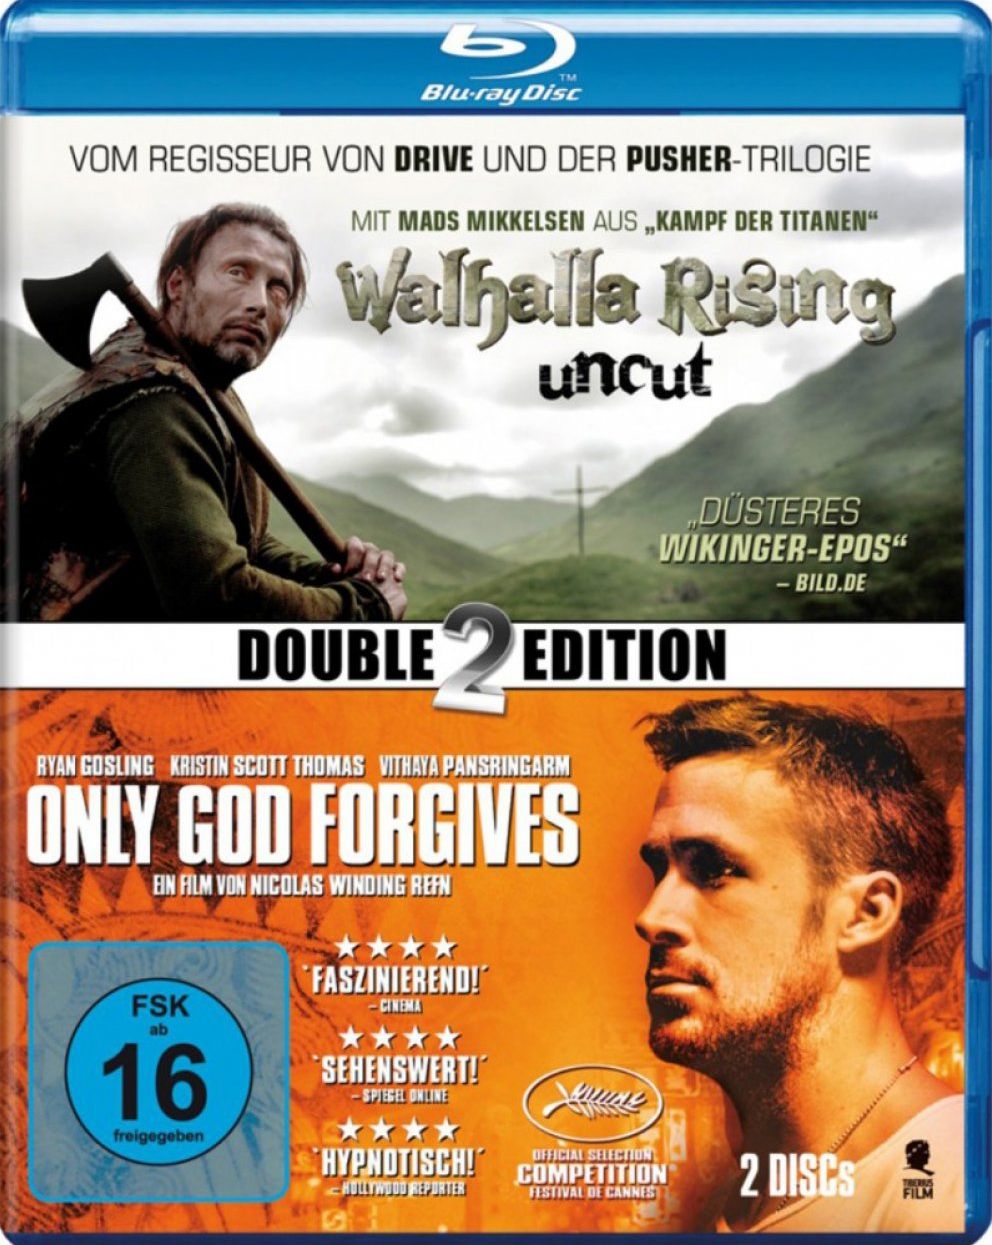 Walhalla Rising / Only God Forgives (Double2Edition) (2 Discs) (BLURAY)